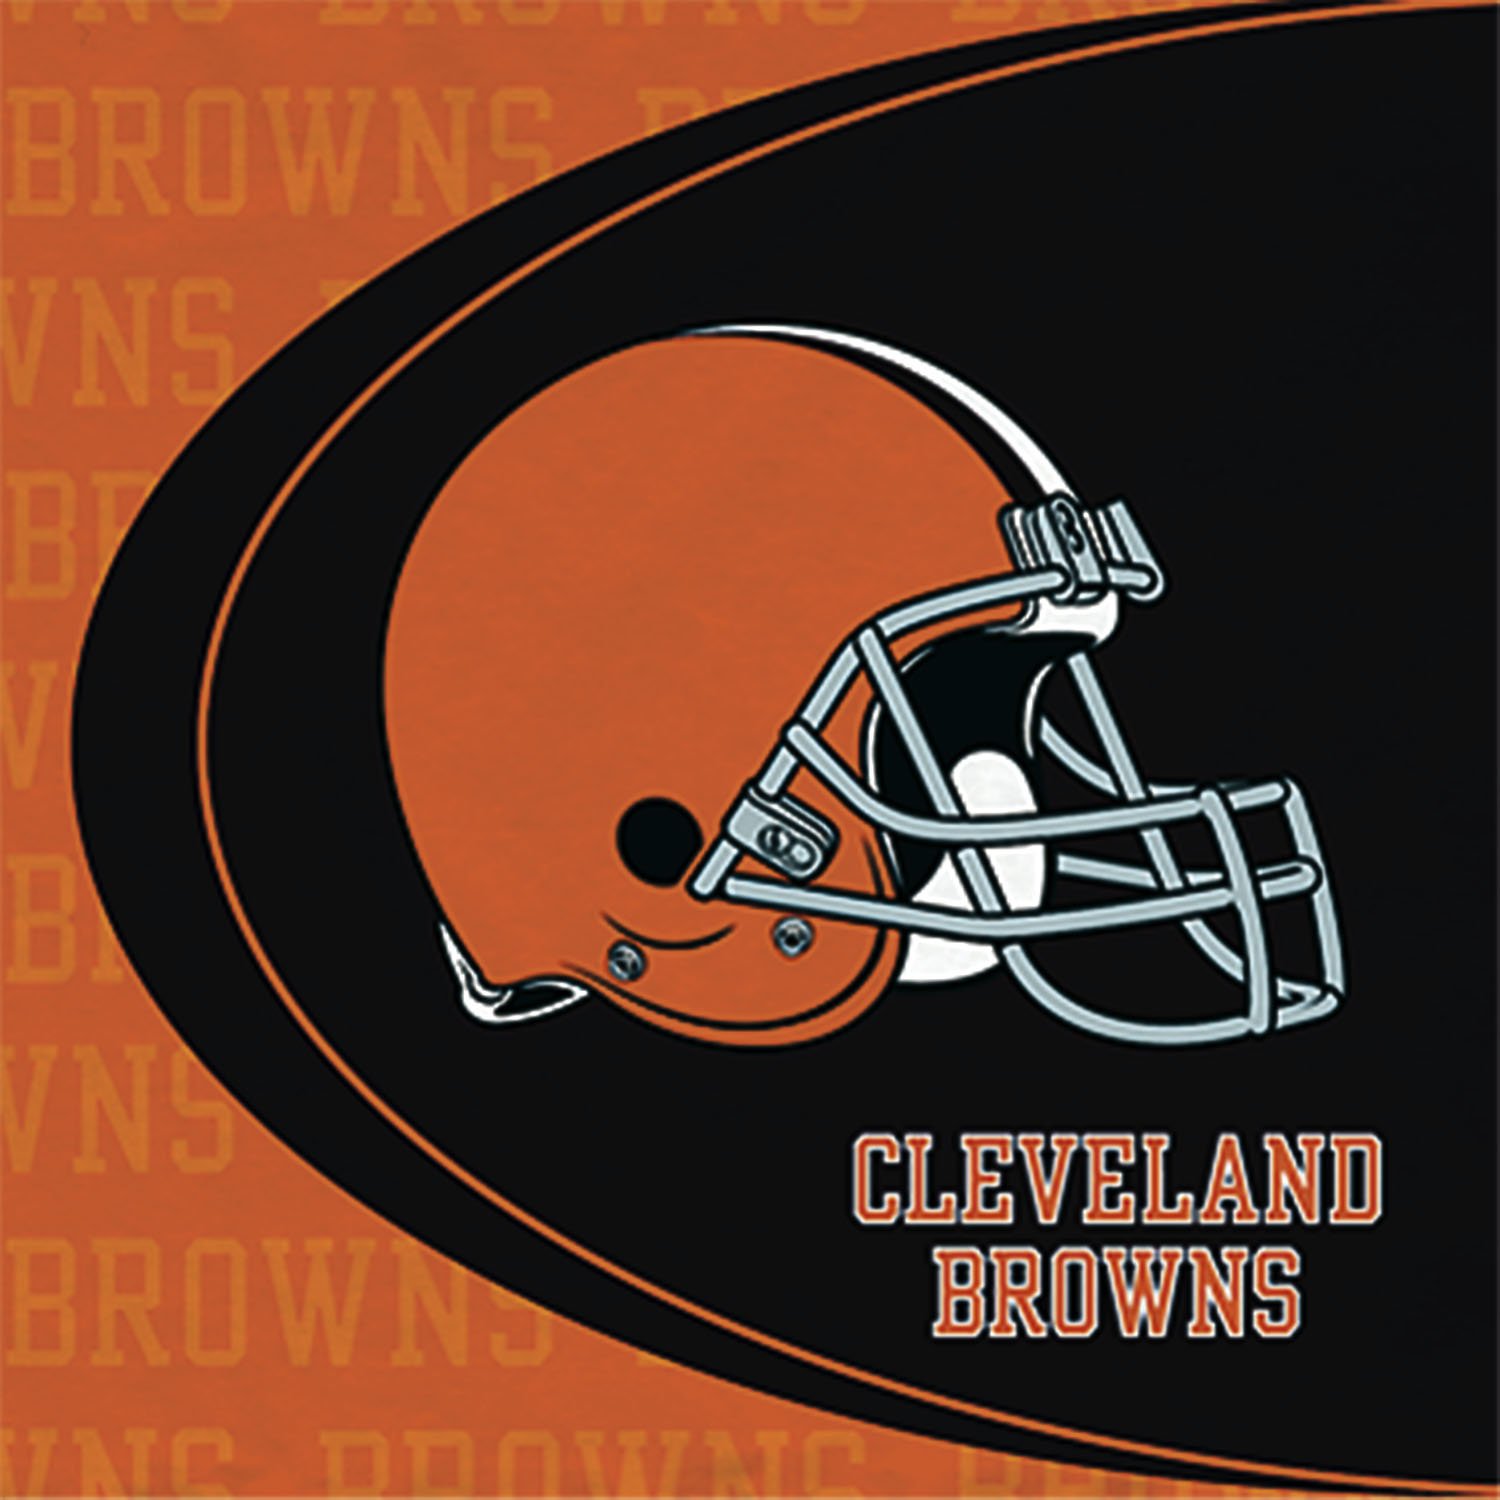 Cleveland Browns Tickets. 